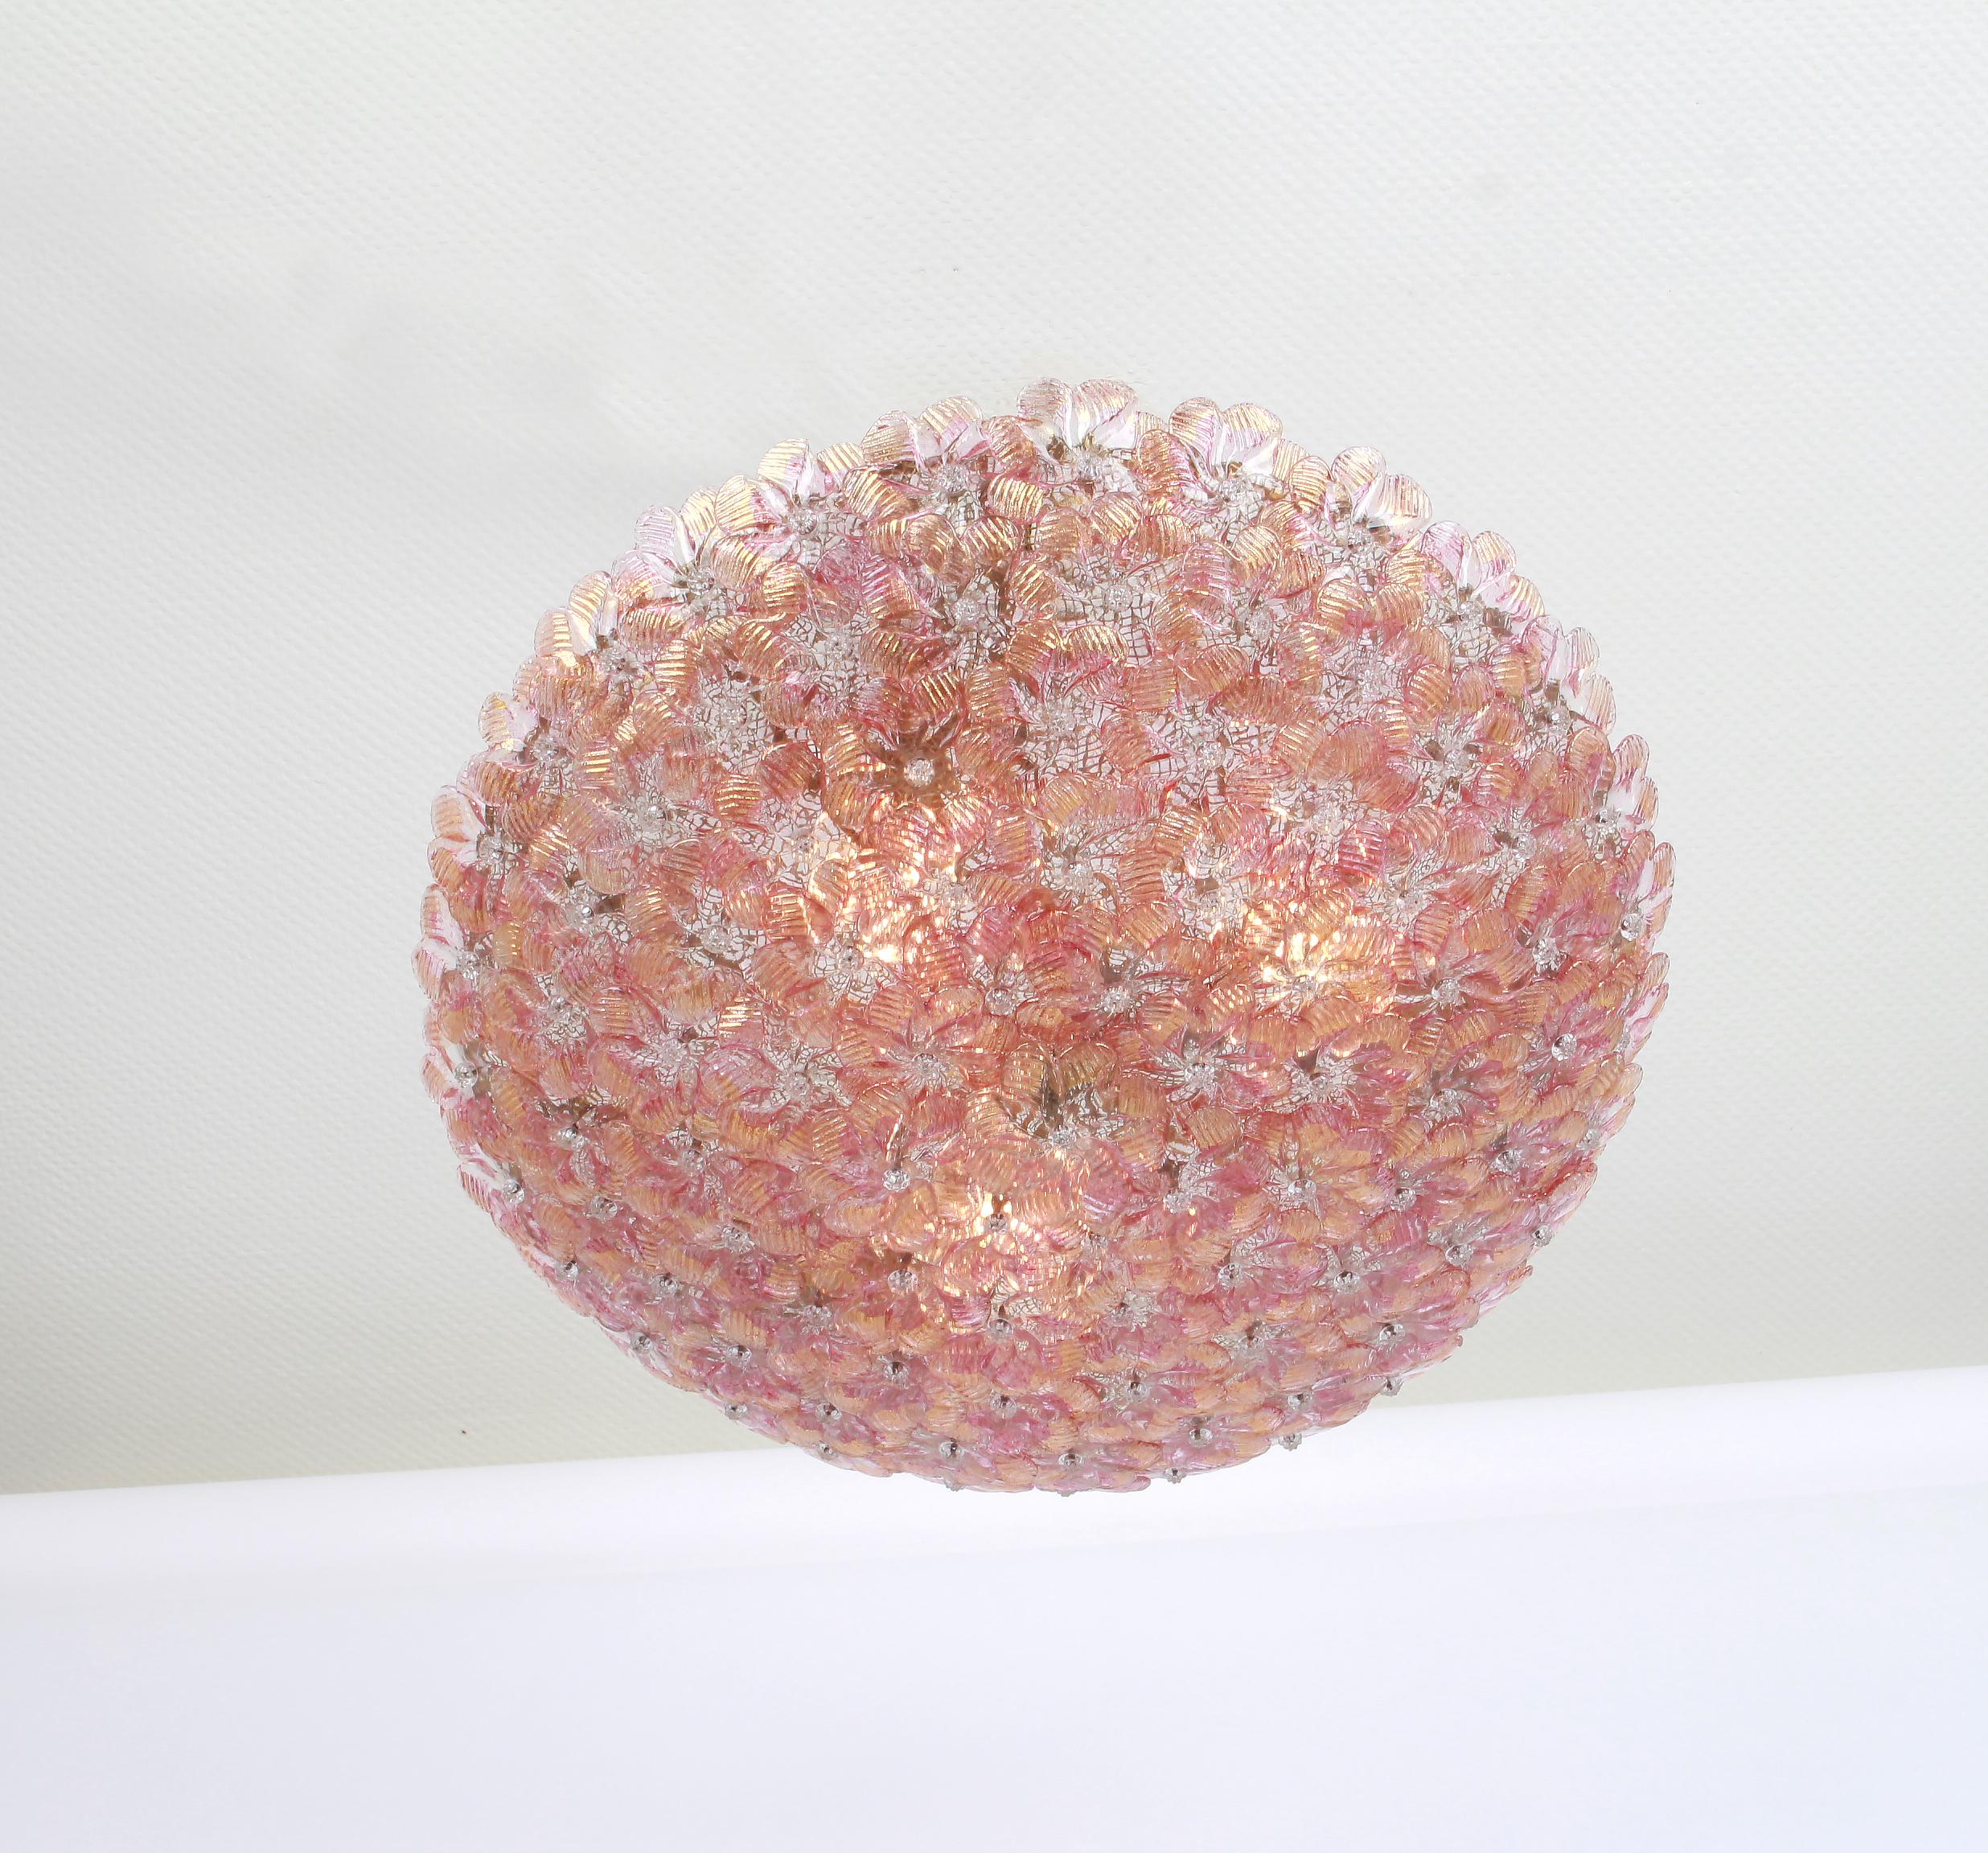 Midcentury Murano glass ceiling fixture by Barovier & Toso, Italy, 1960s
Very good condition.

High quality and in very good condition. Cleaned, well-wired and ready to use.

The fixture requires 3 x E27 standard bulbs with 80W max each and